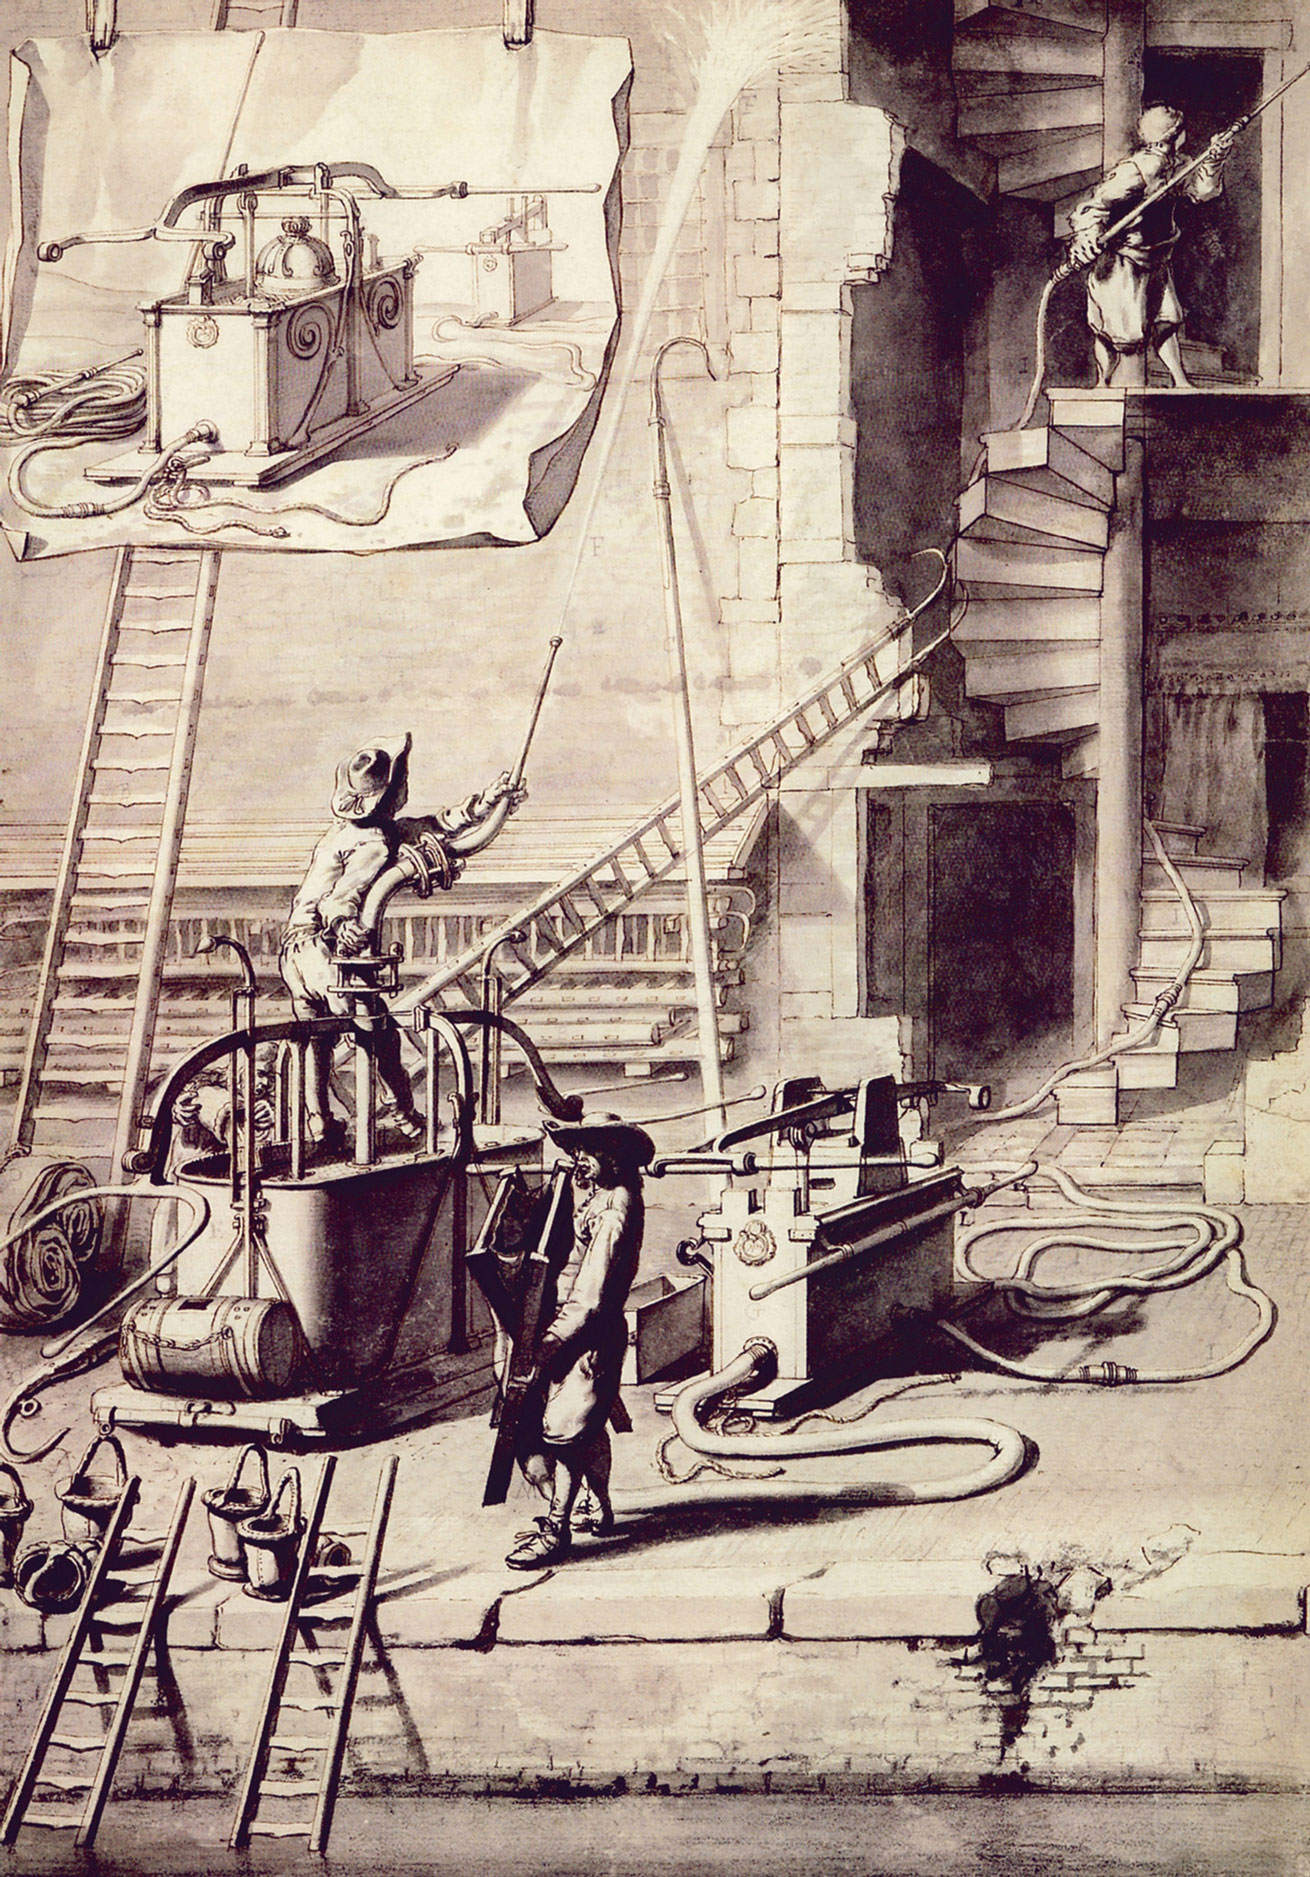 A drawing by Jan van der Heyden from the 1680s which shows many advantages of his new inventions, including the pliable fire hose and a more efficient fire engine. 